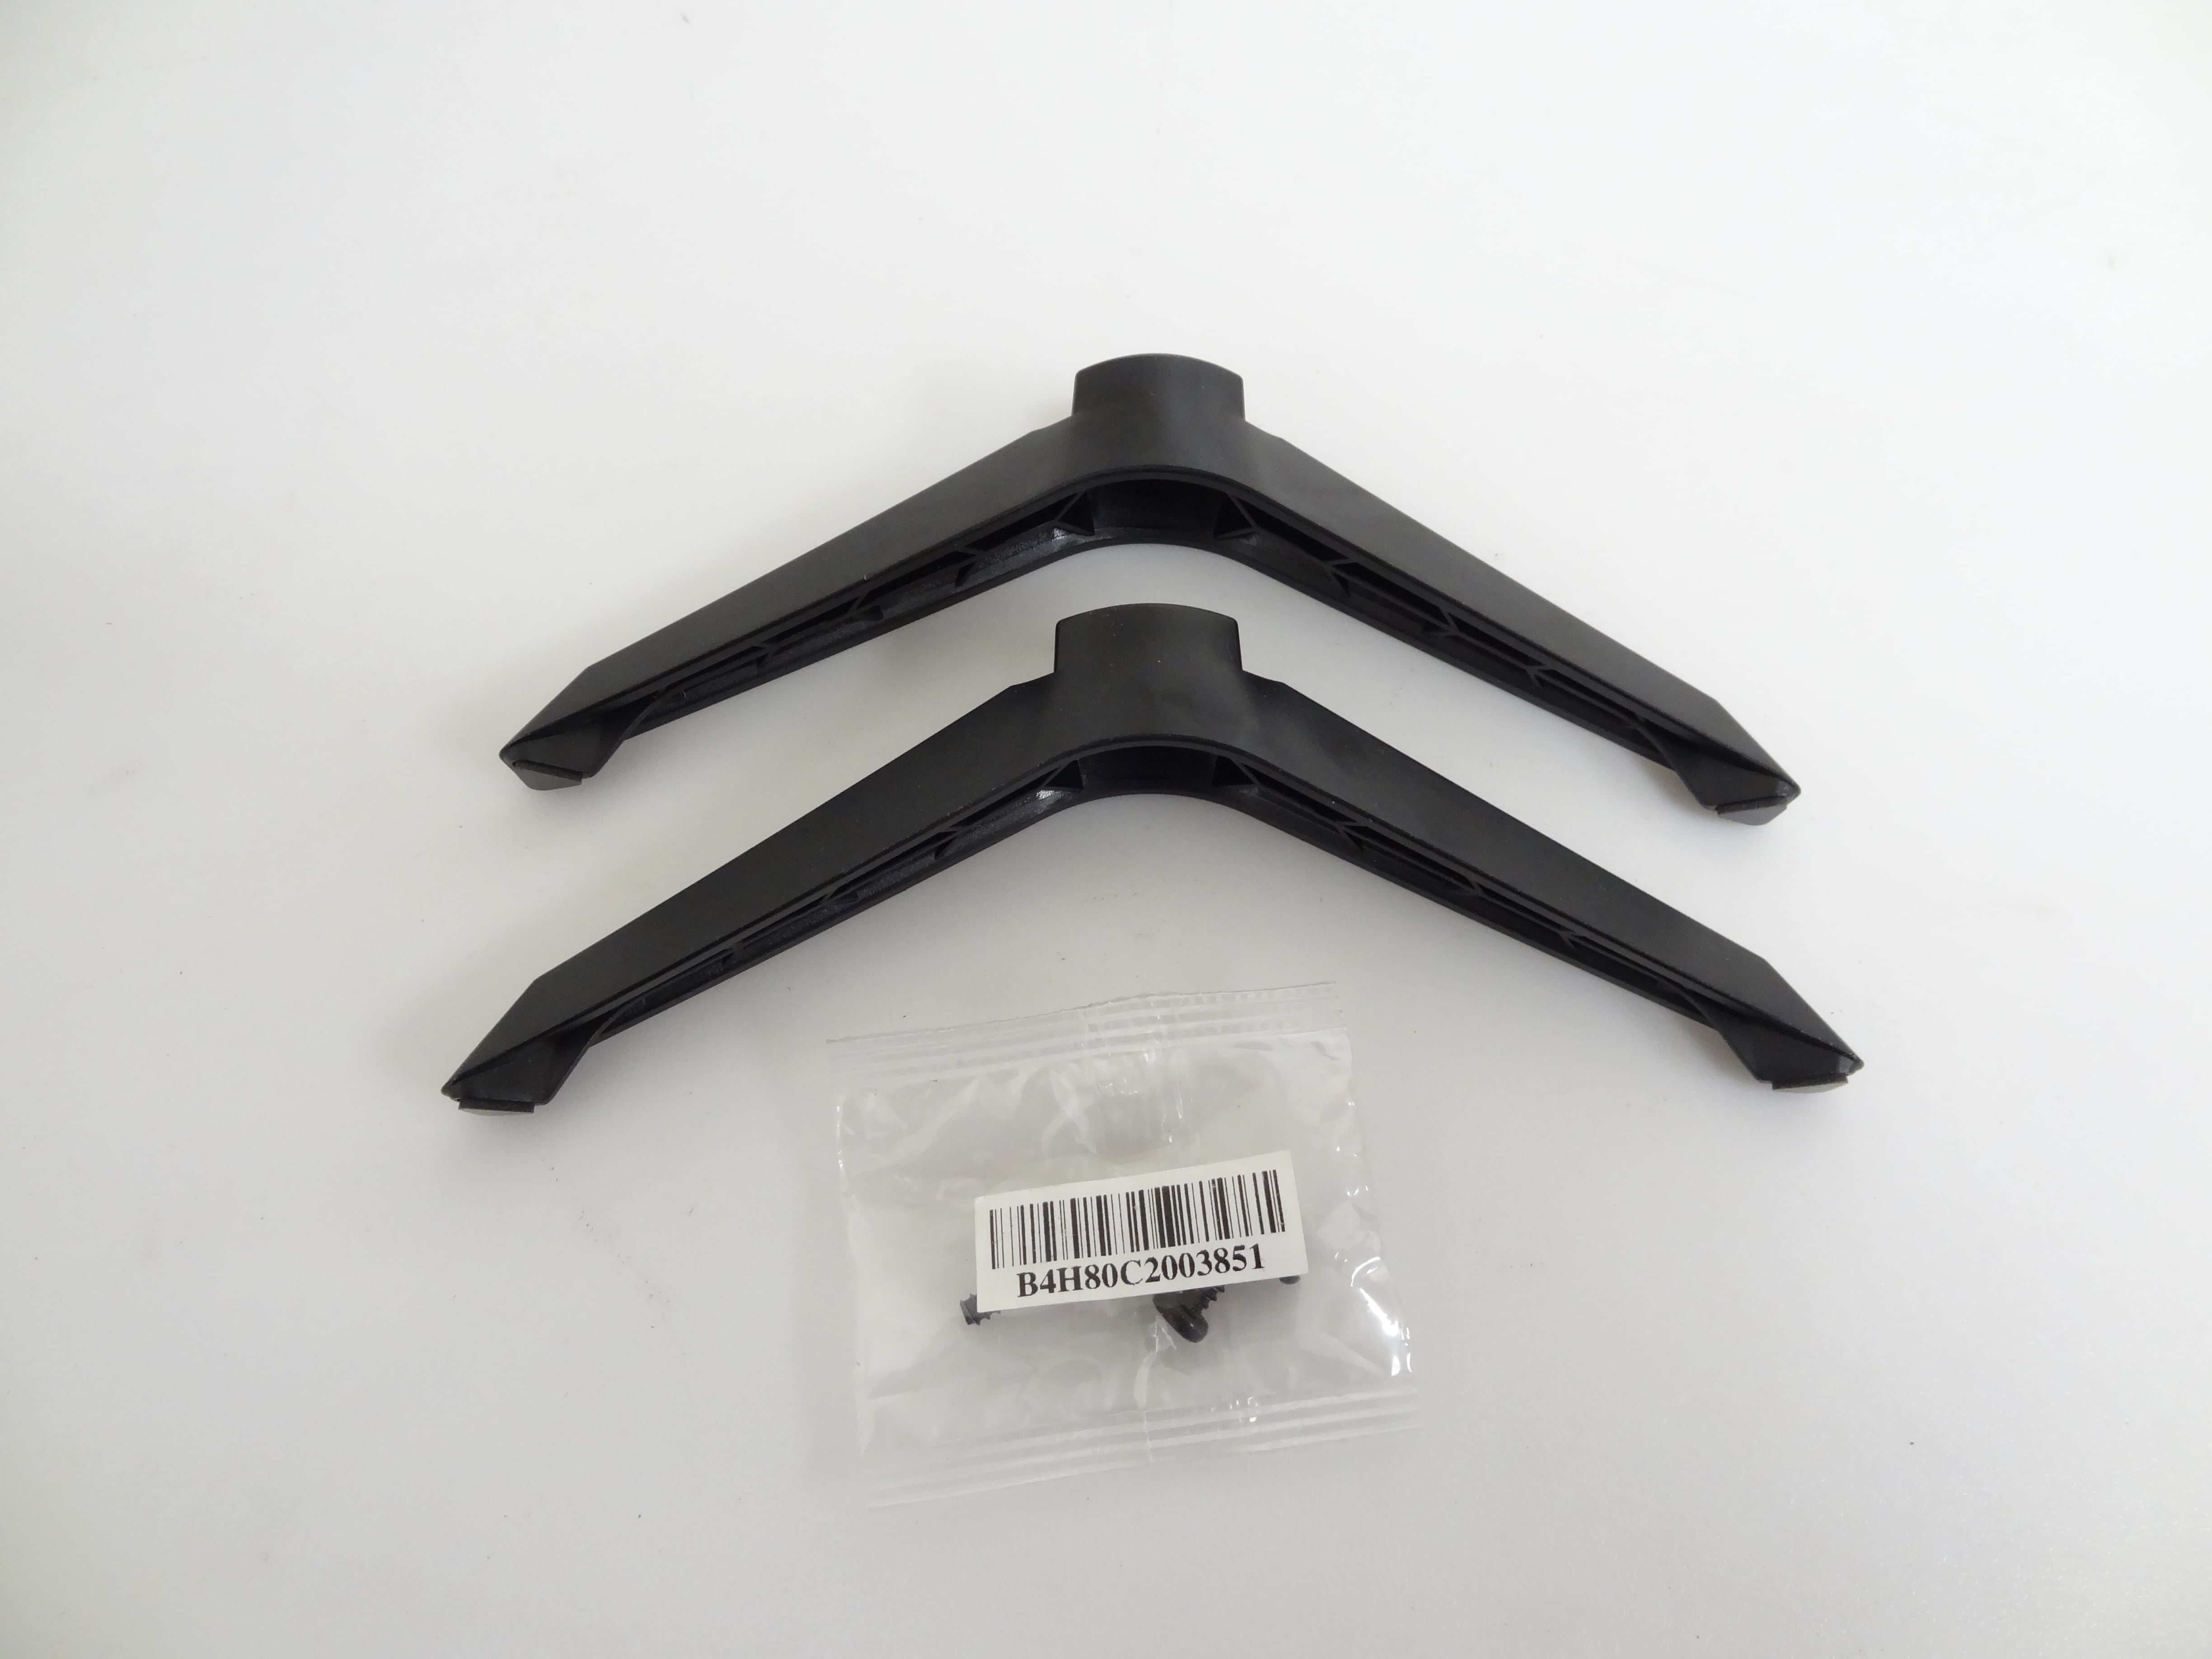 Complete Base Stand Pedestal Legs with Screw Set for Vizio D32h-C0 